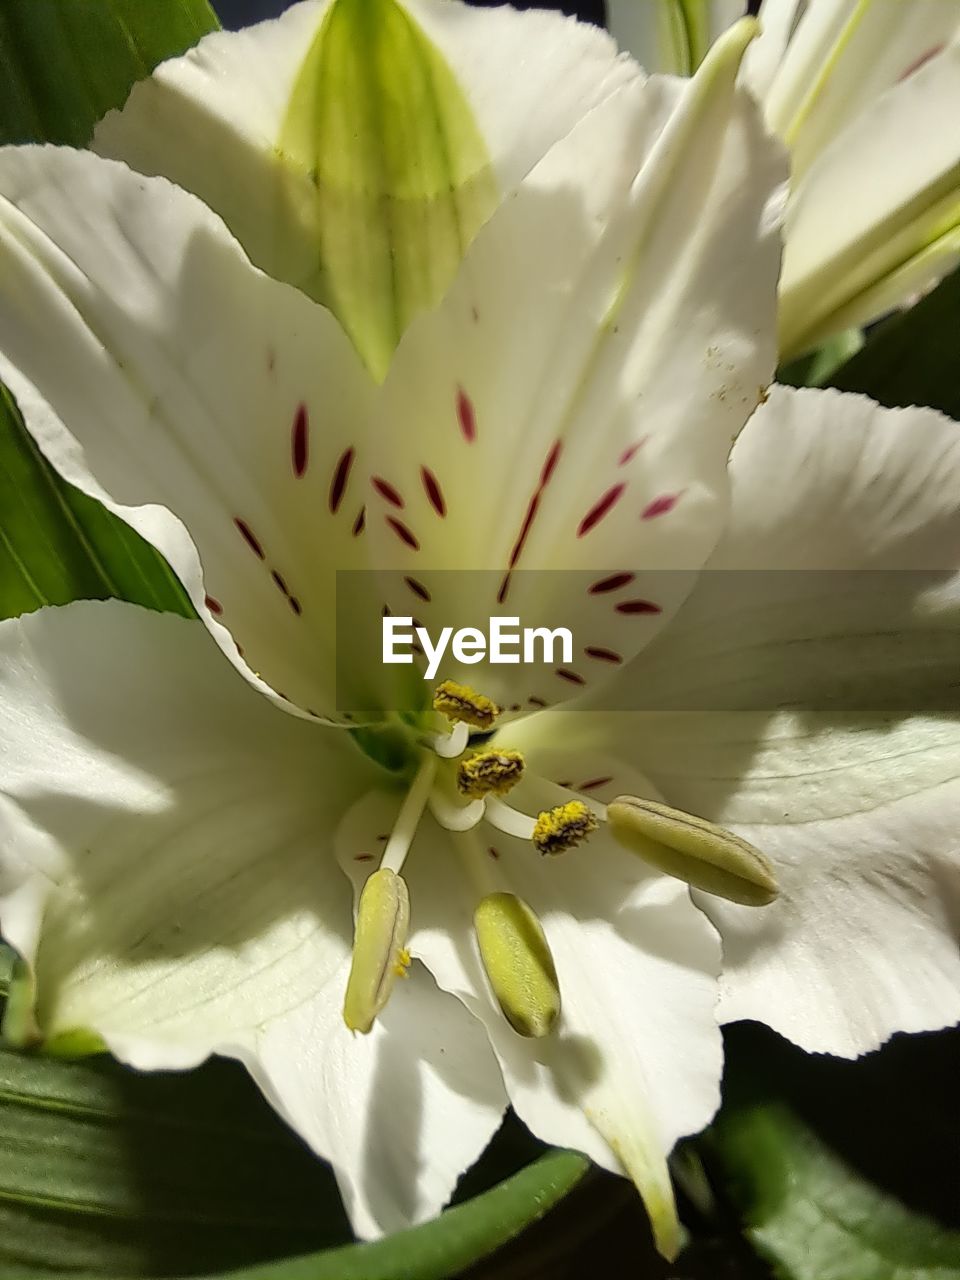 flower, plant, flowering plant, beauty in nature, freshness, close-up, fragility, petal, growth, flower head, inflorescence, nature, pollen, white, blossom, stamen, lily, no people, macro photography, botany, springtime, leaf, outdoors, macro, plant part, green, sunlight, focus on foreground, pistil, day